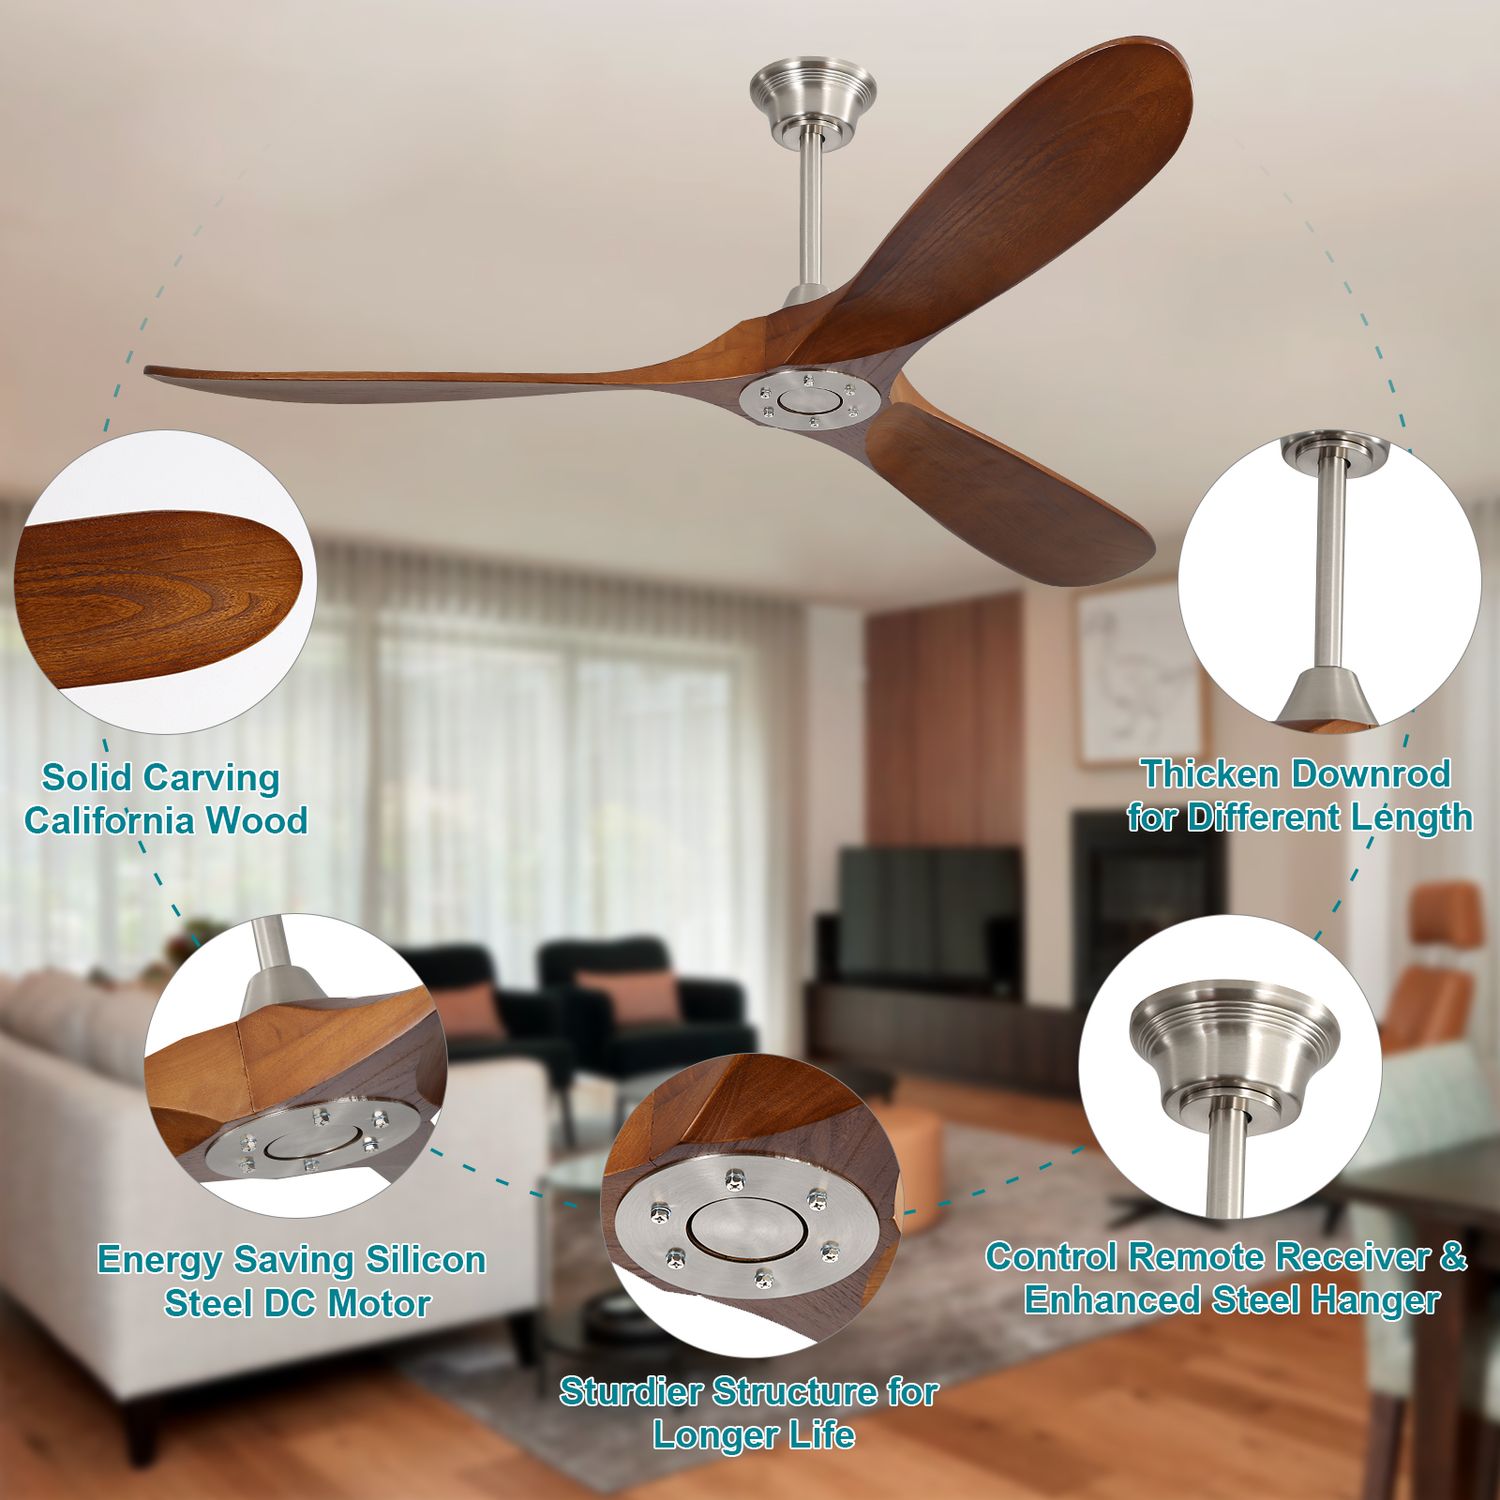 details of KBS 60 Inch Decorative Wood Ceiling Fan including solid carving wood material, thicken downrod, steel DC motor, and more